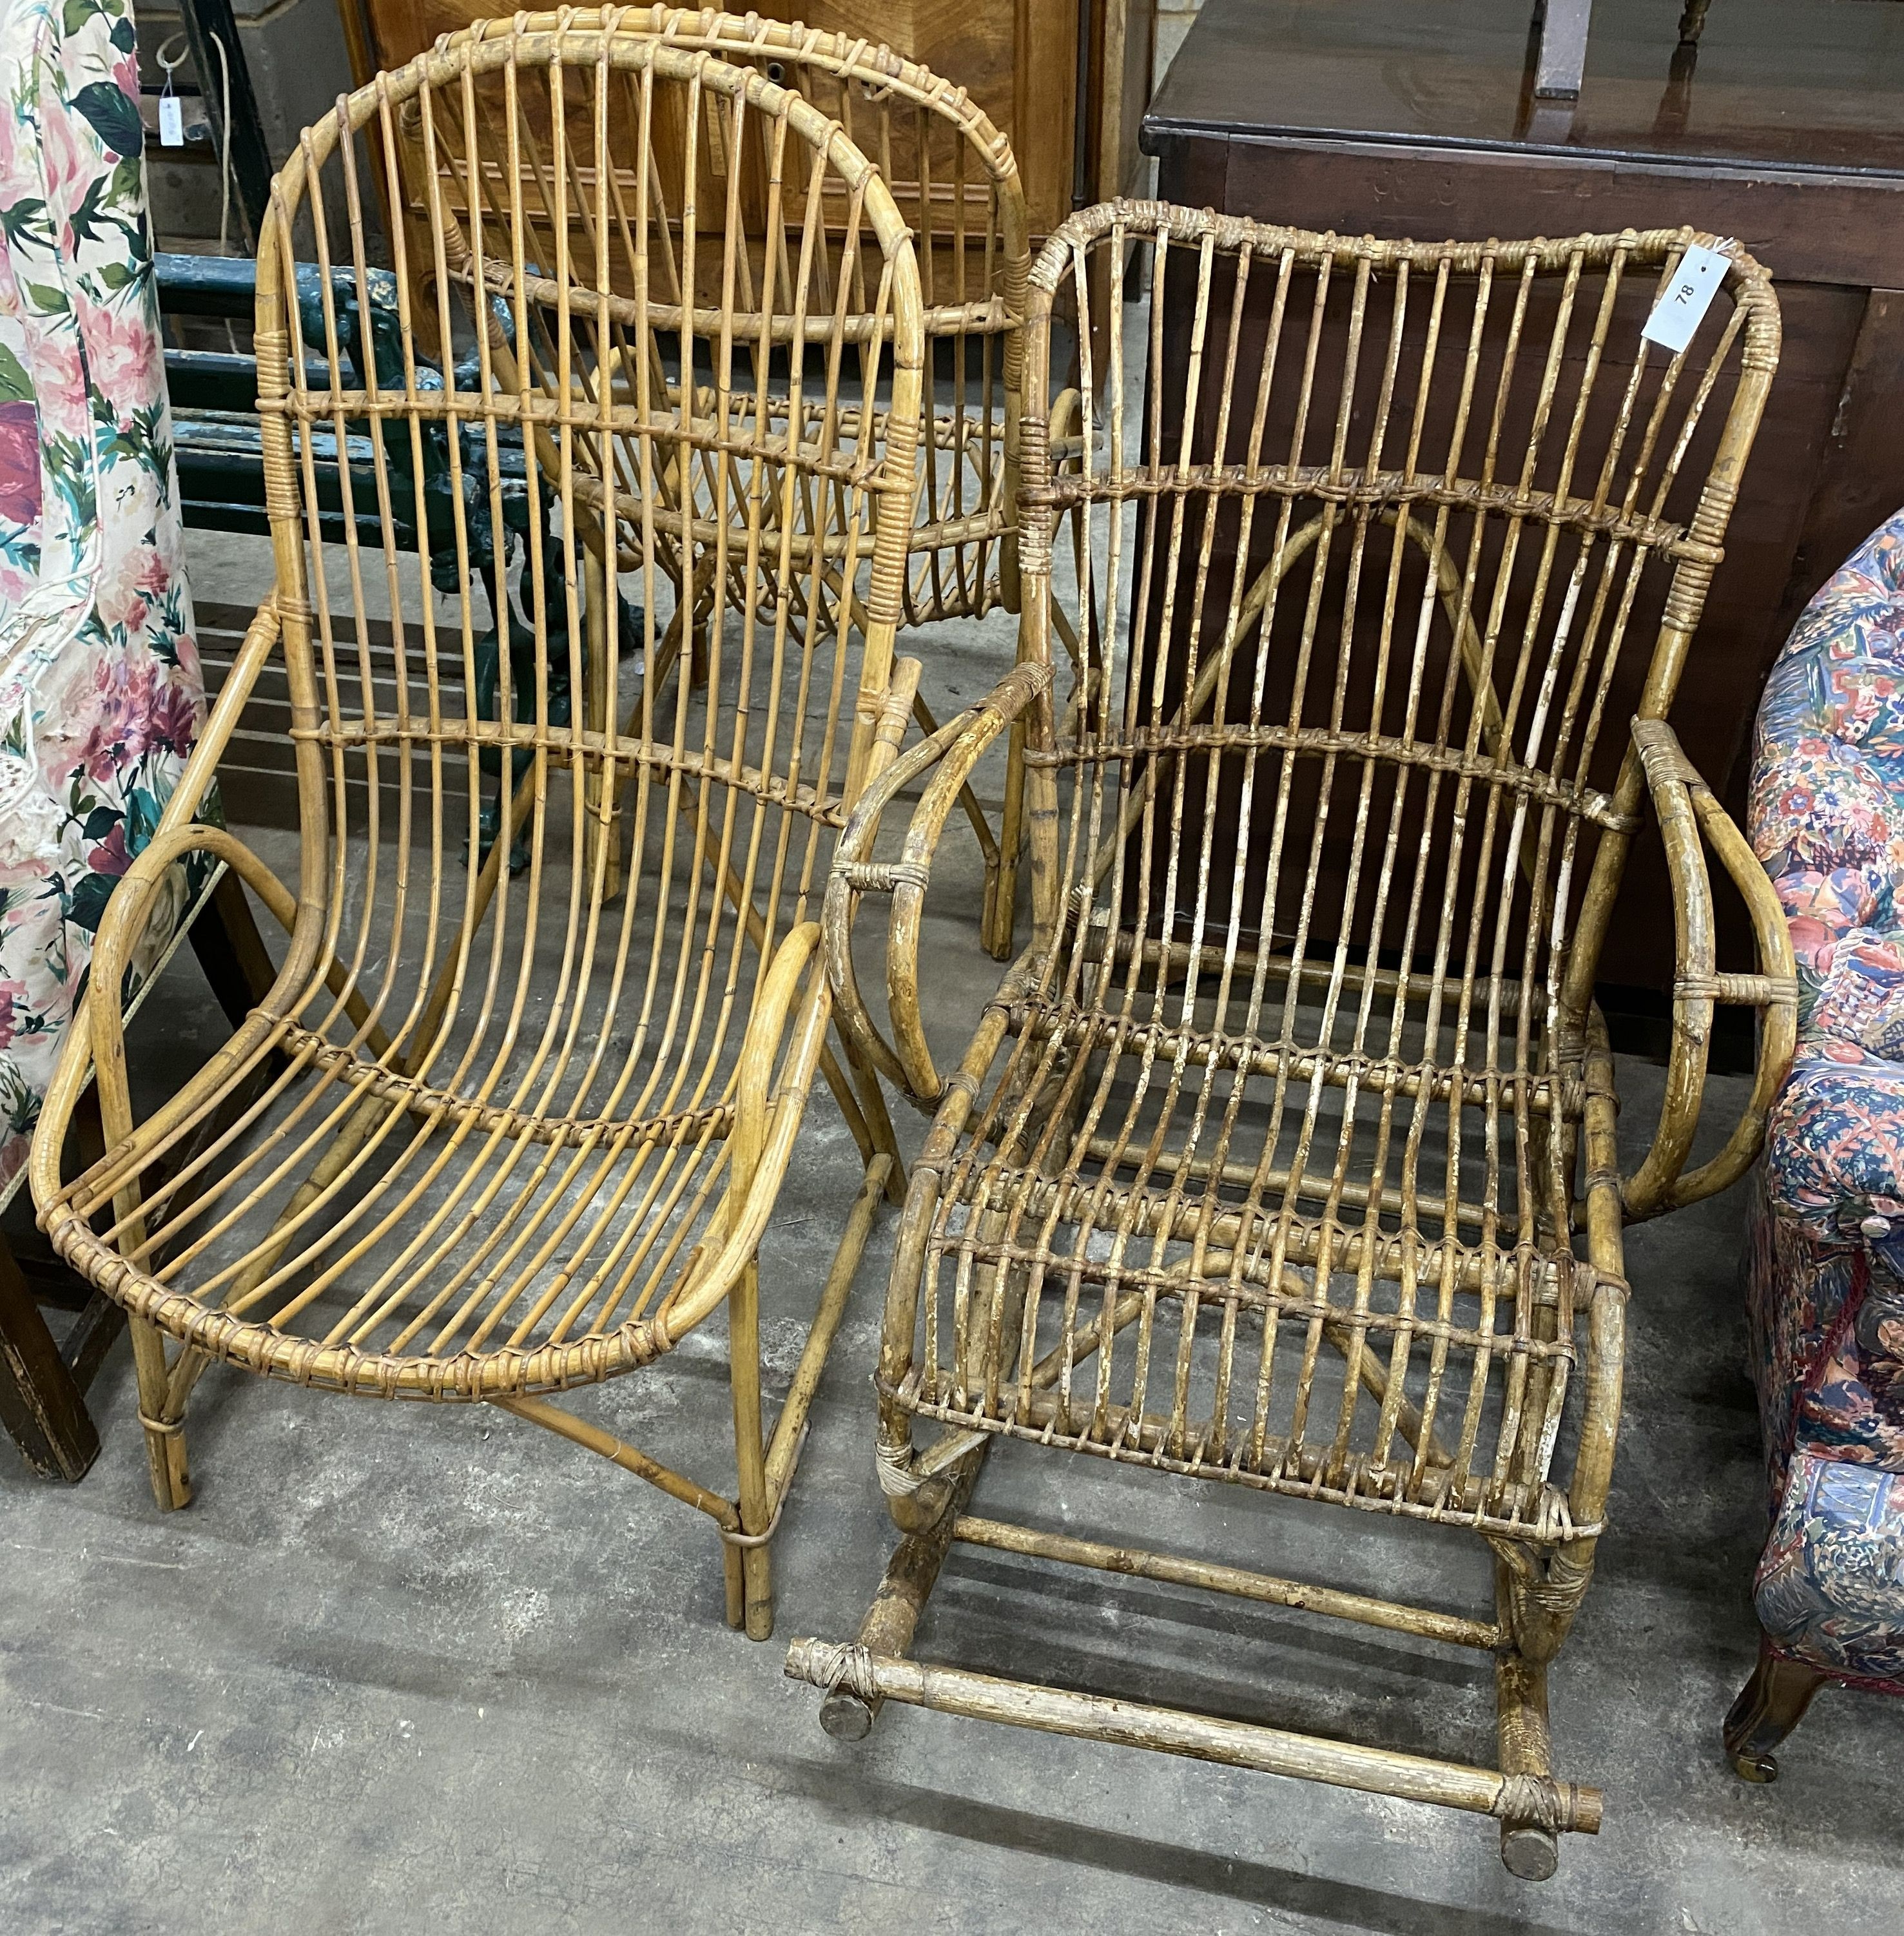 A rocking chair in the style of Franco Albino and a pair of bamboo conservatory chairs